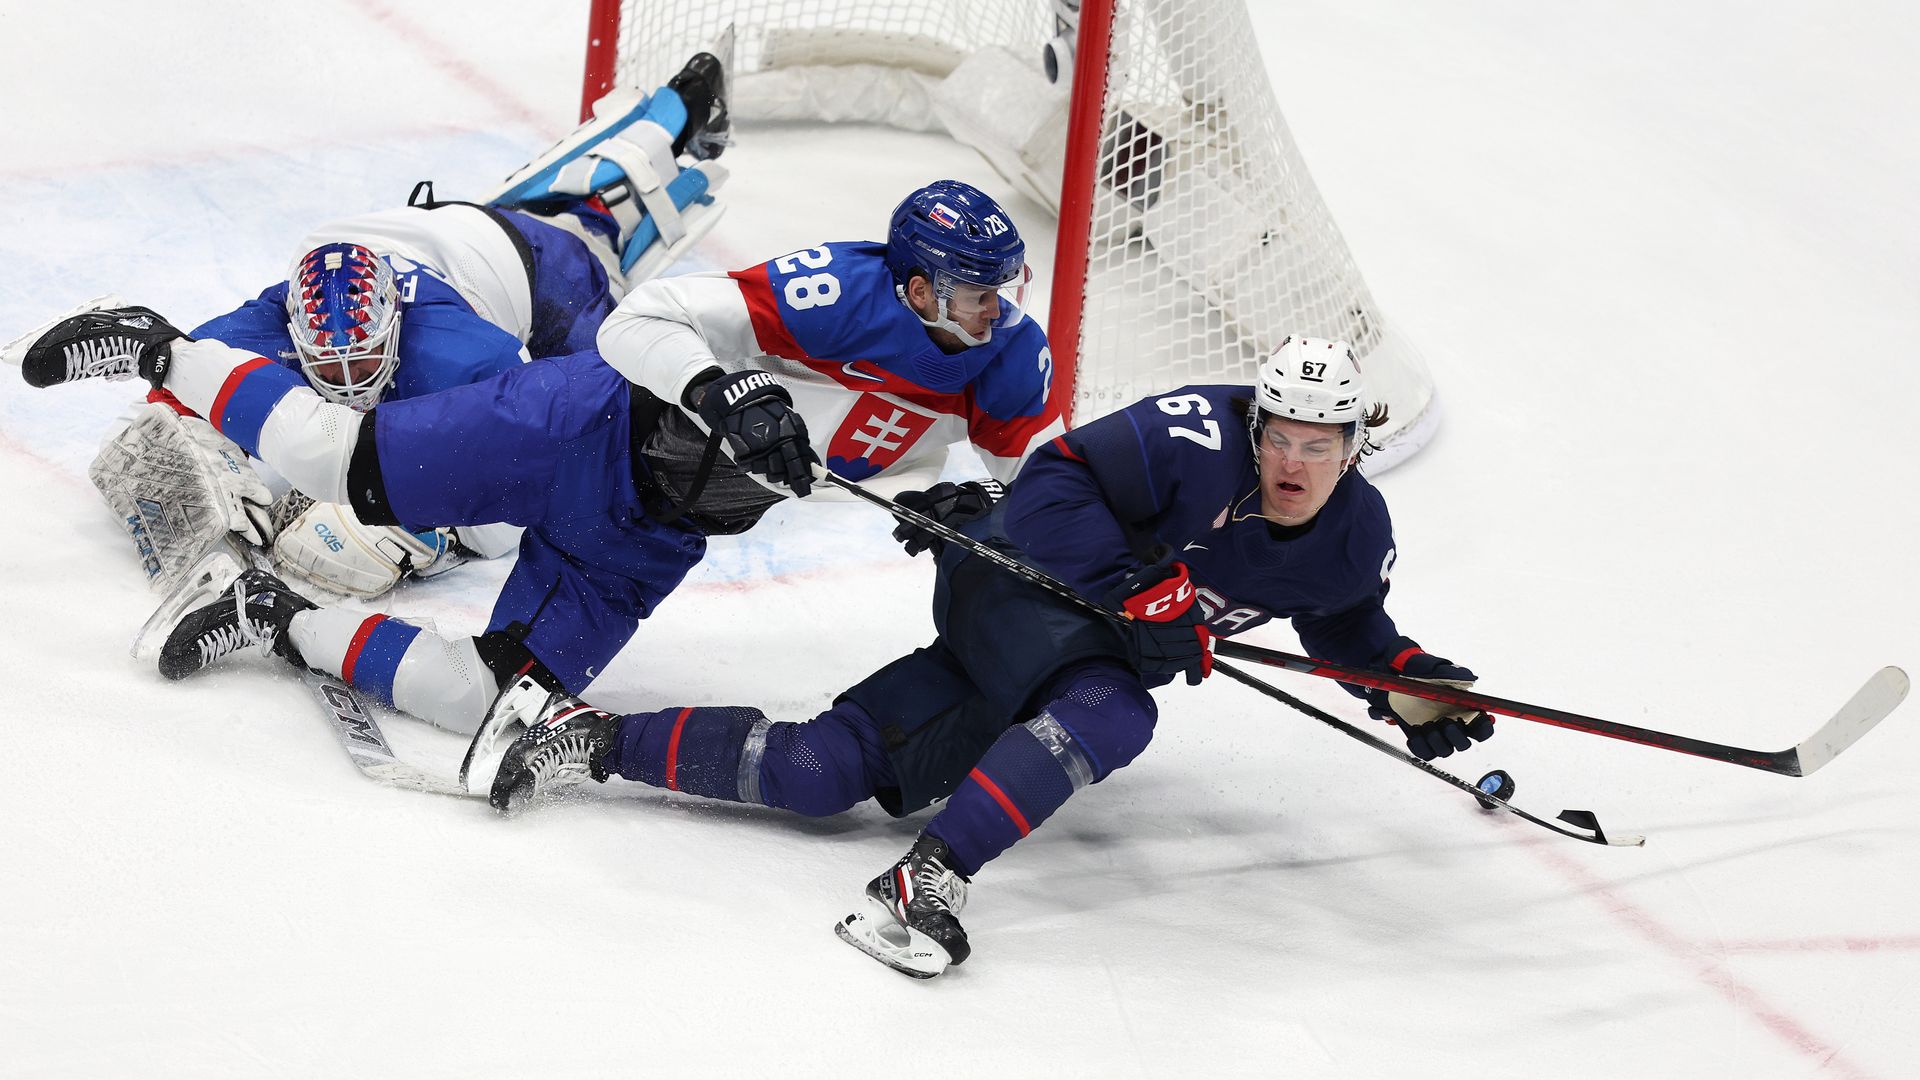 Matt Knies #67 of Team USA and Martin Gernat #28 of Slovakia fall pursuing the puck in overtime during the Men’s Ice Hockey Quarterfinal match at the Beijing Olympics Feb. 16.